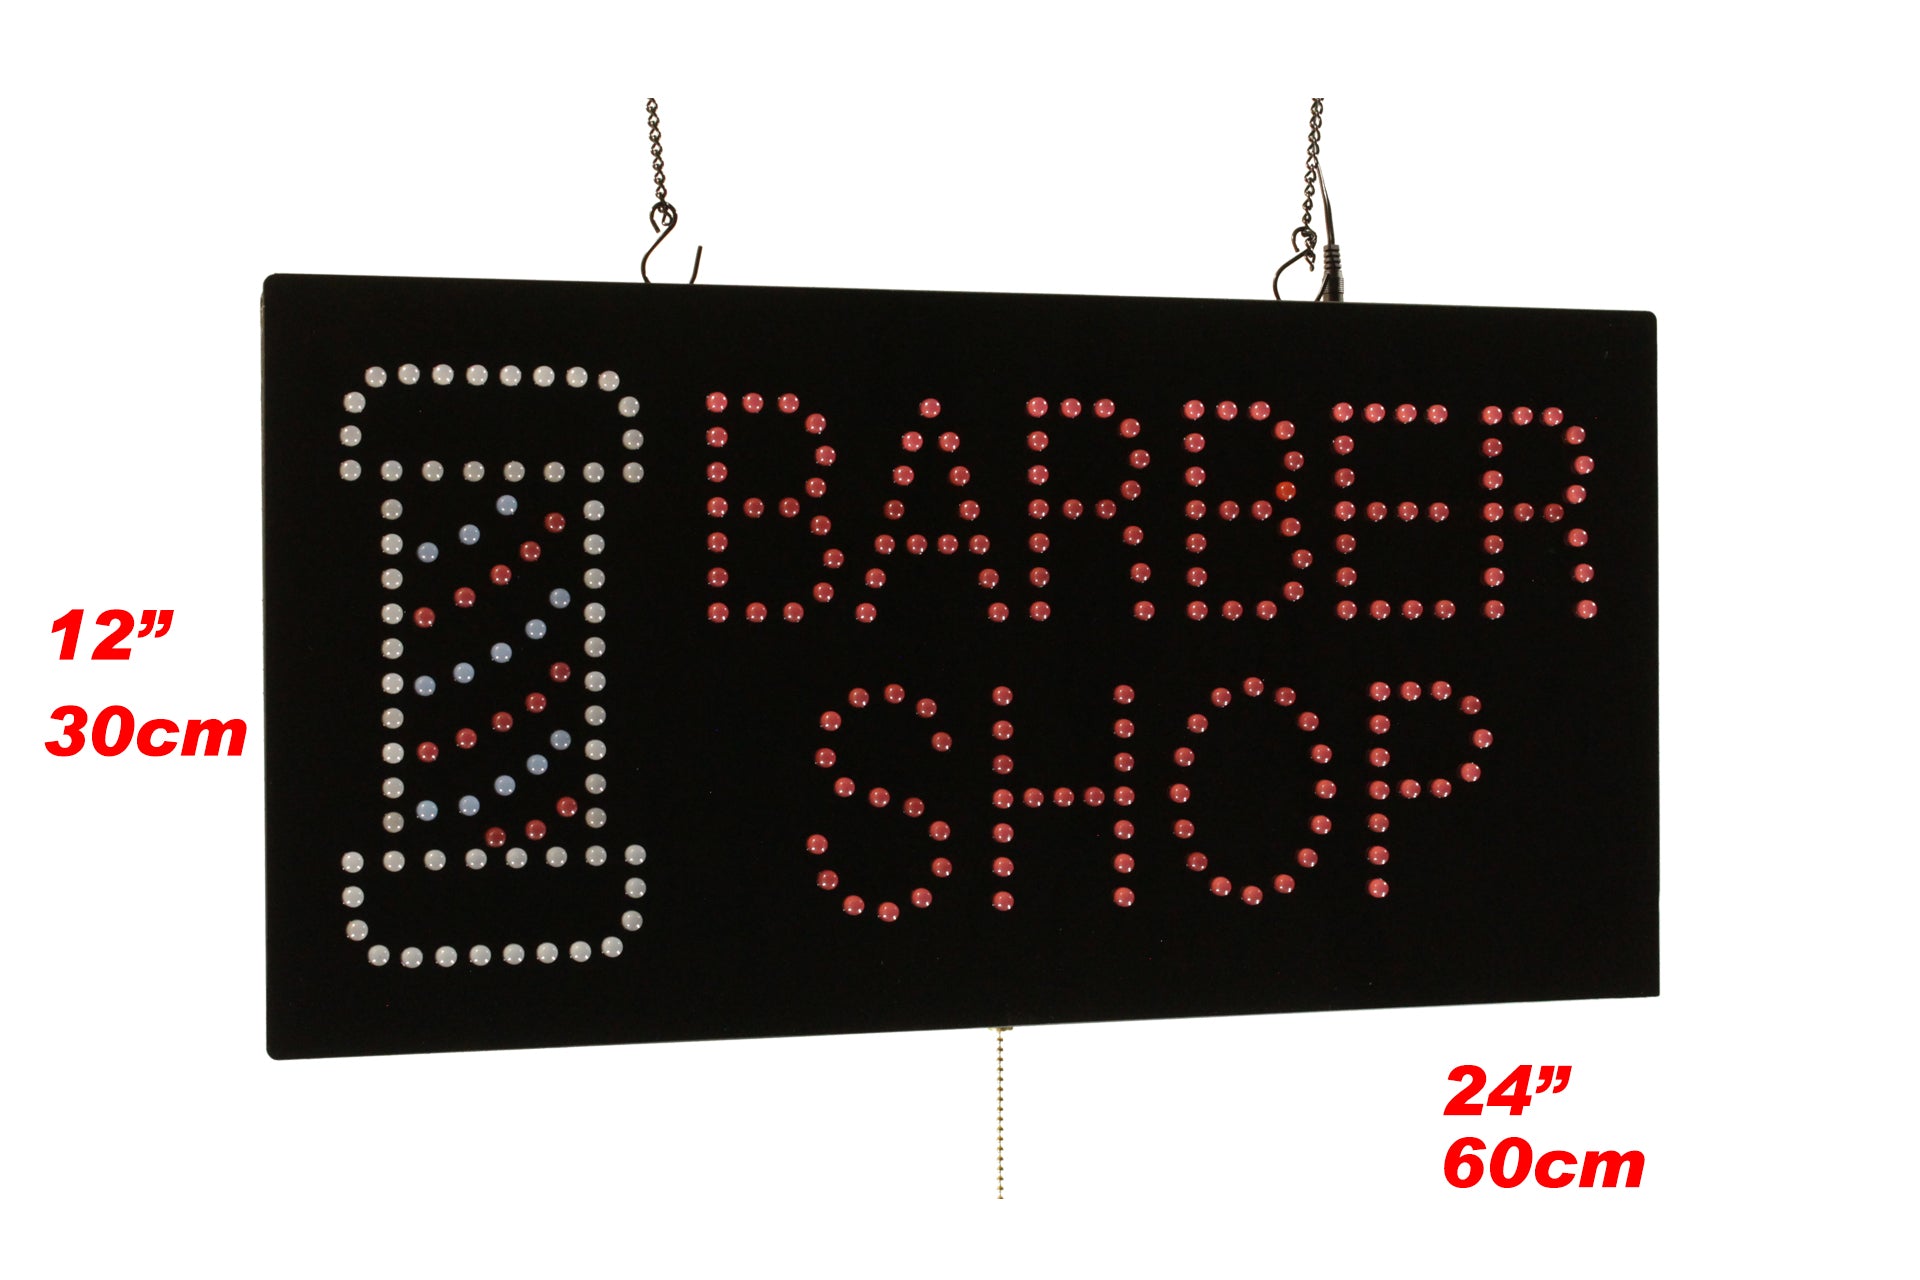 Barber Shop Sign TOPKING Signage LED Neon Open Store Window Shop Business  Display Grand Opening Gift Haircut – TOPKING SIGNS